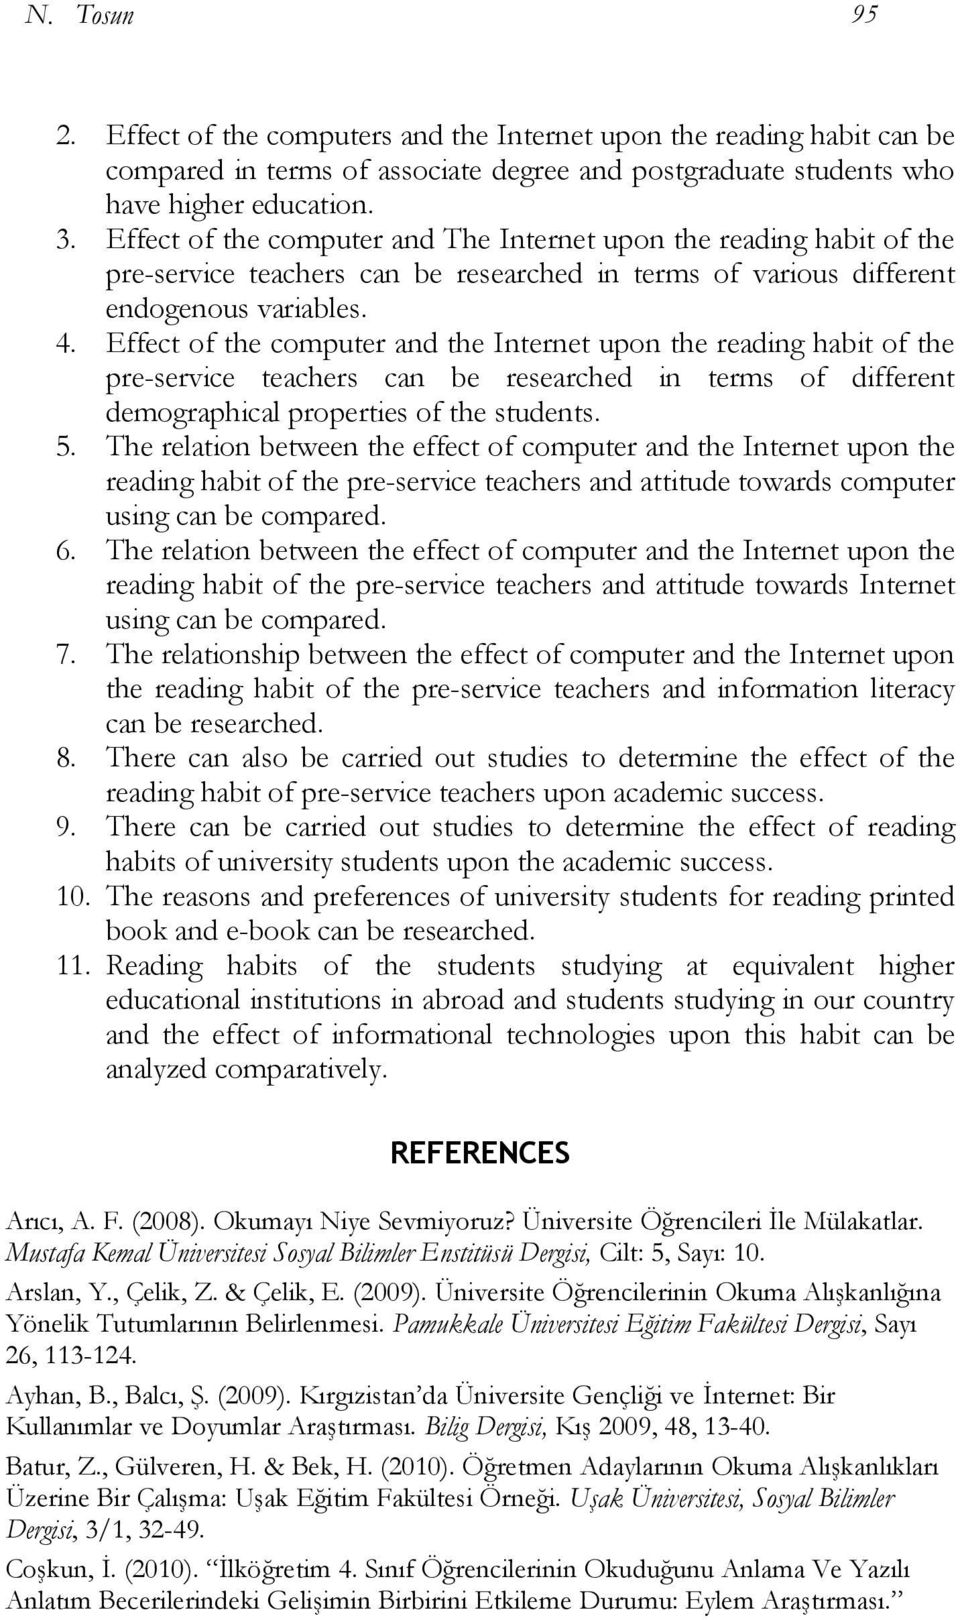 Effect of the computer and the Internet upon the reading habit of the pre-service teachers can be researched in terms of different demographical properties of the students. 5.